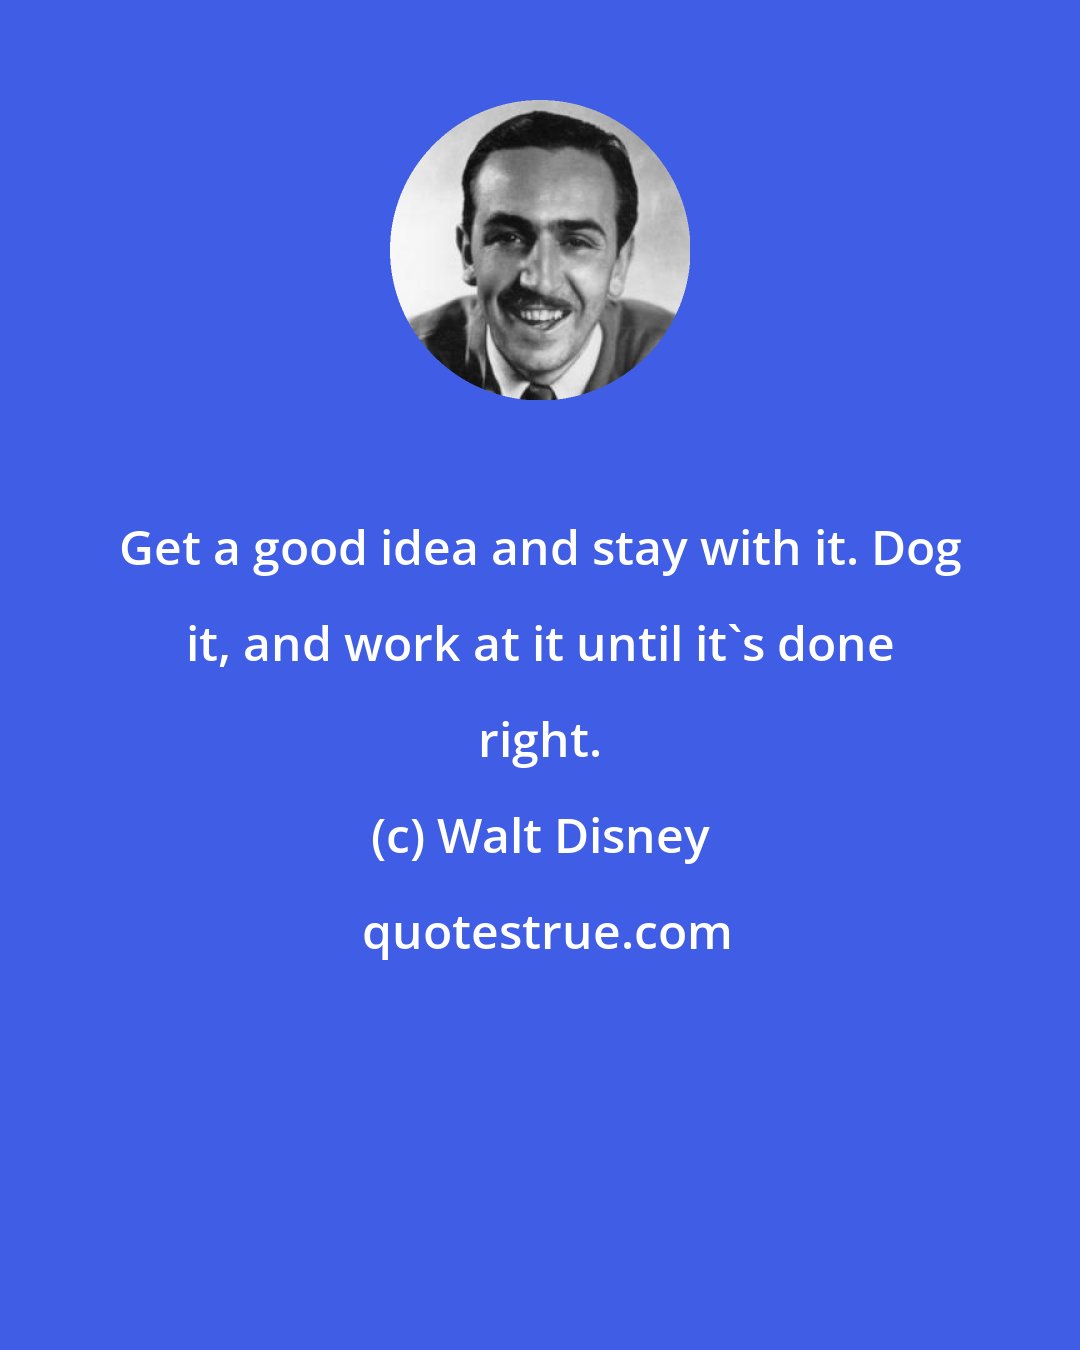 Walt Disney: Get a good idea and stay with it. Dog it, and work at it until it's done right.